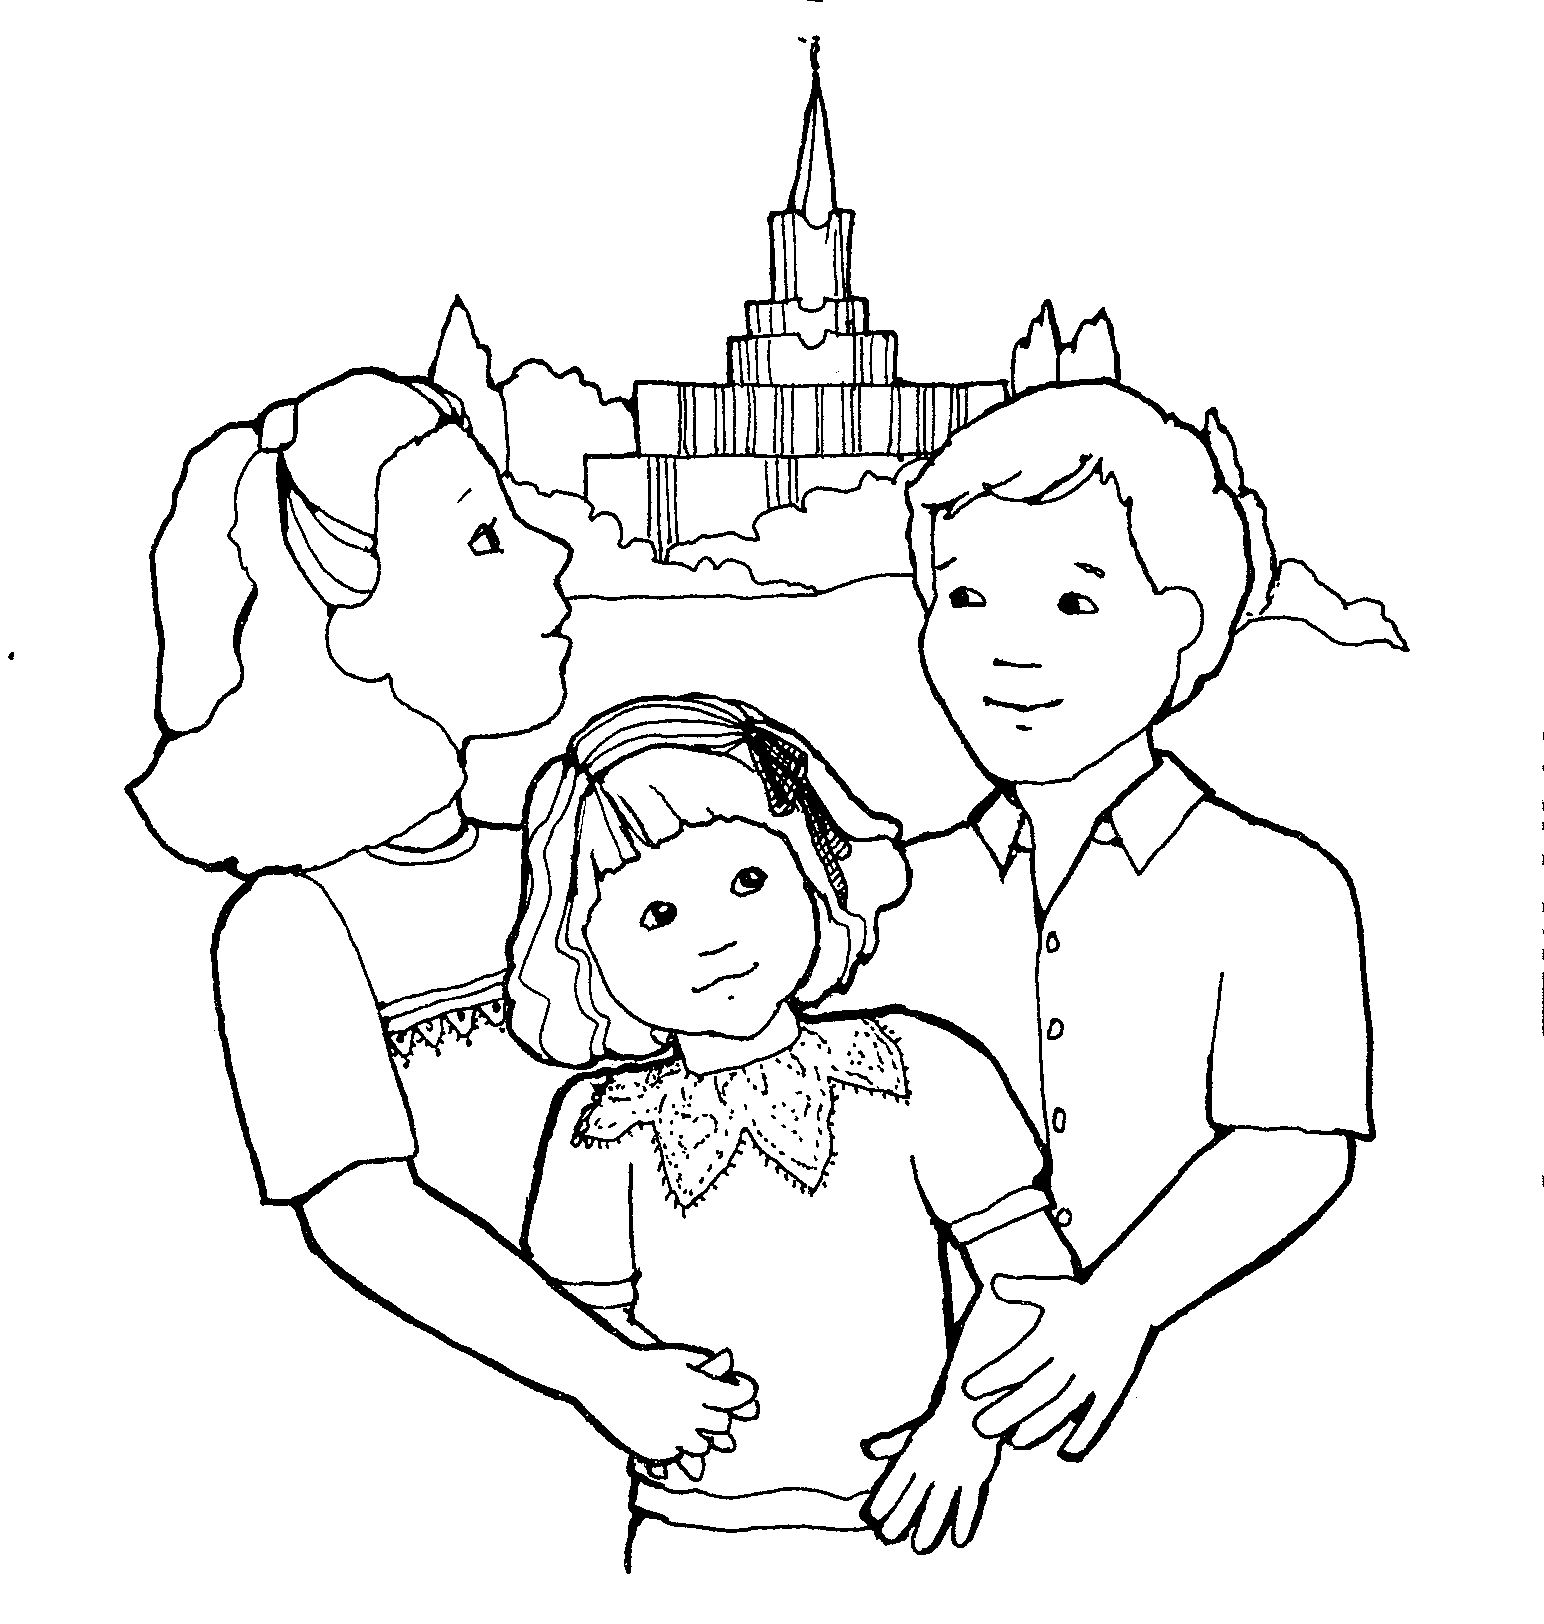 Free Lds Clipart To Color For Primary Children   Lds Coloring Pictures